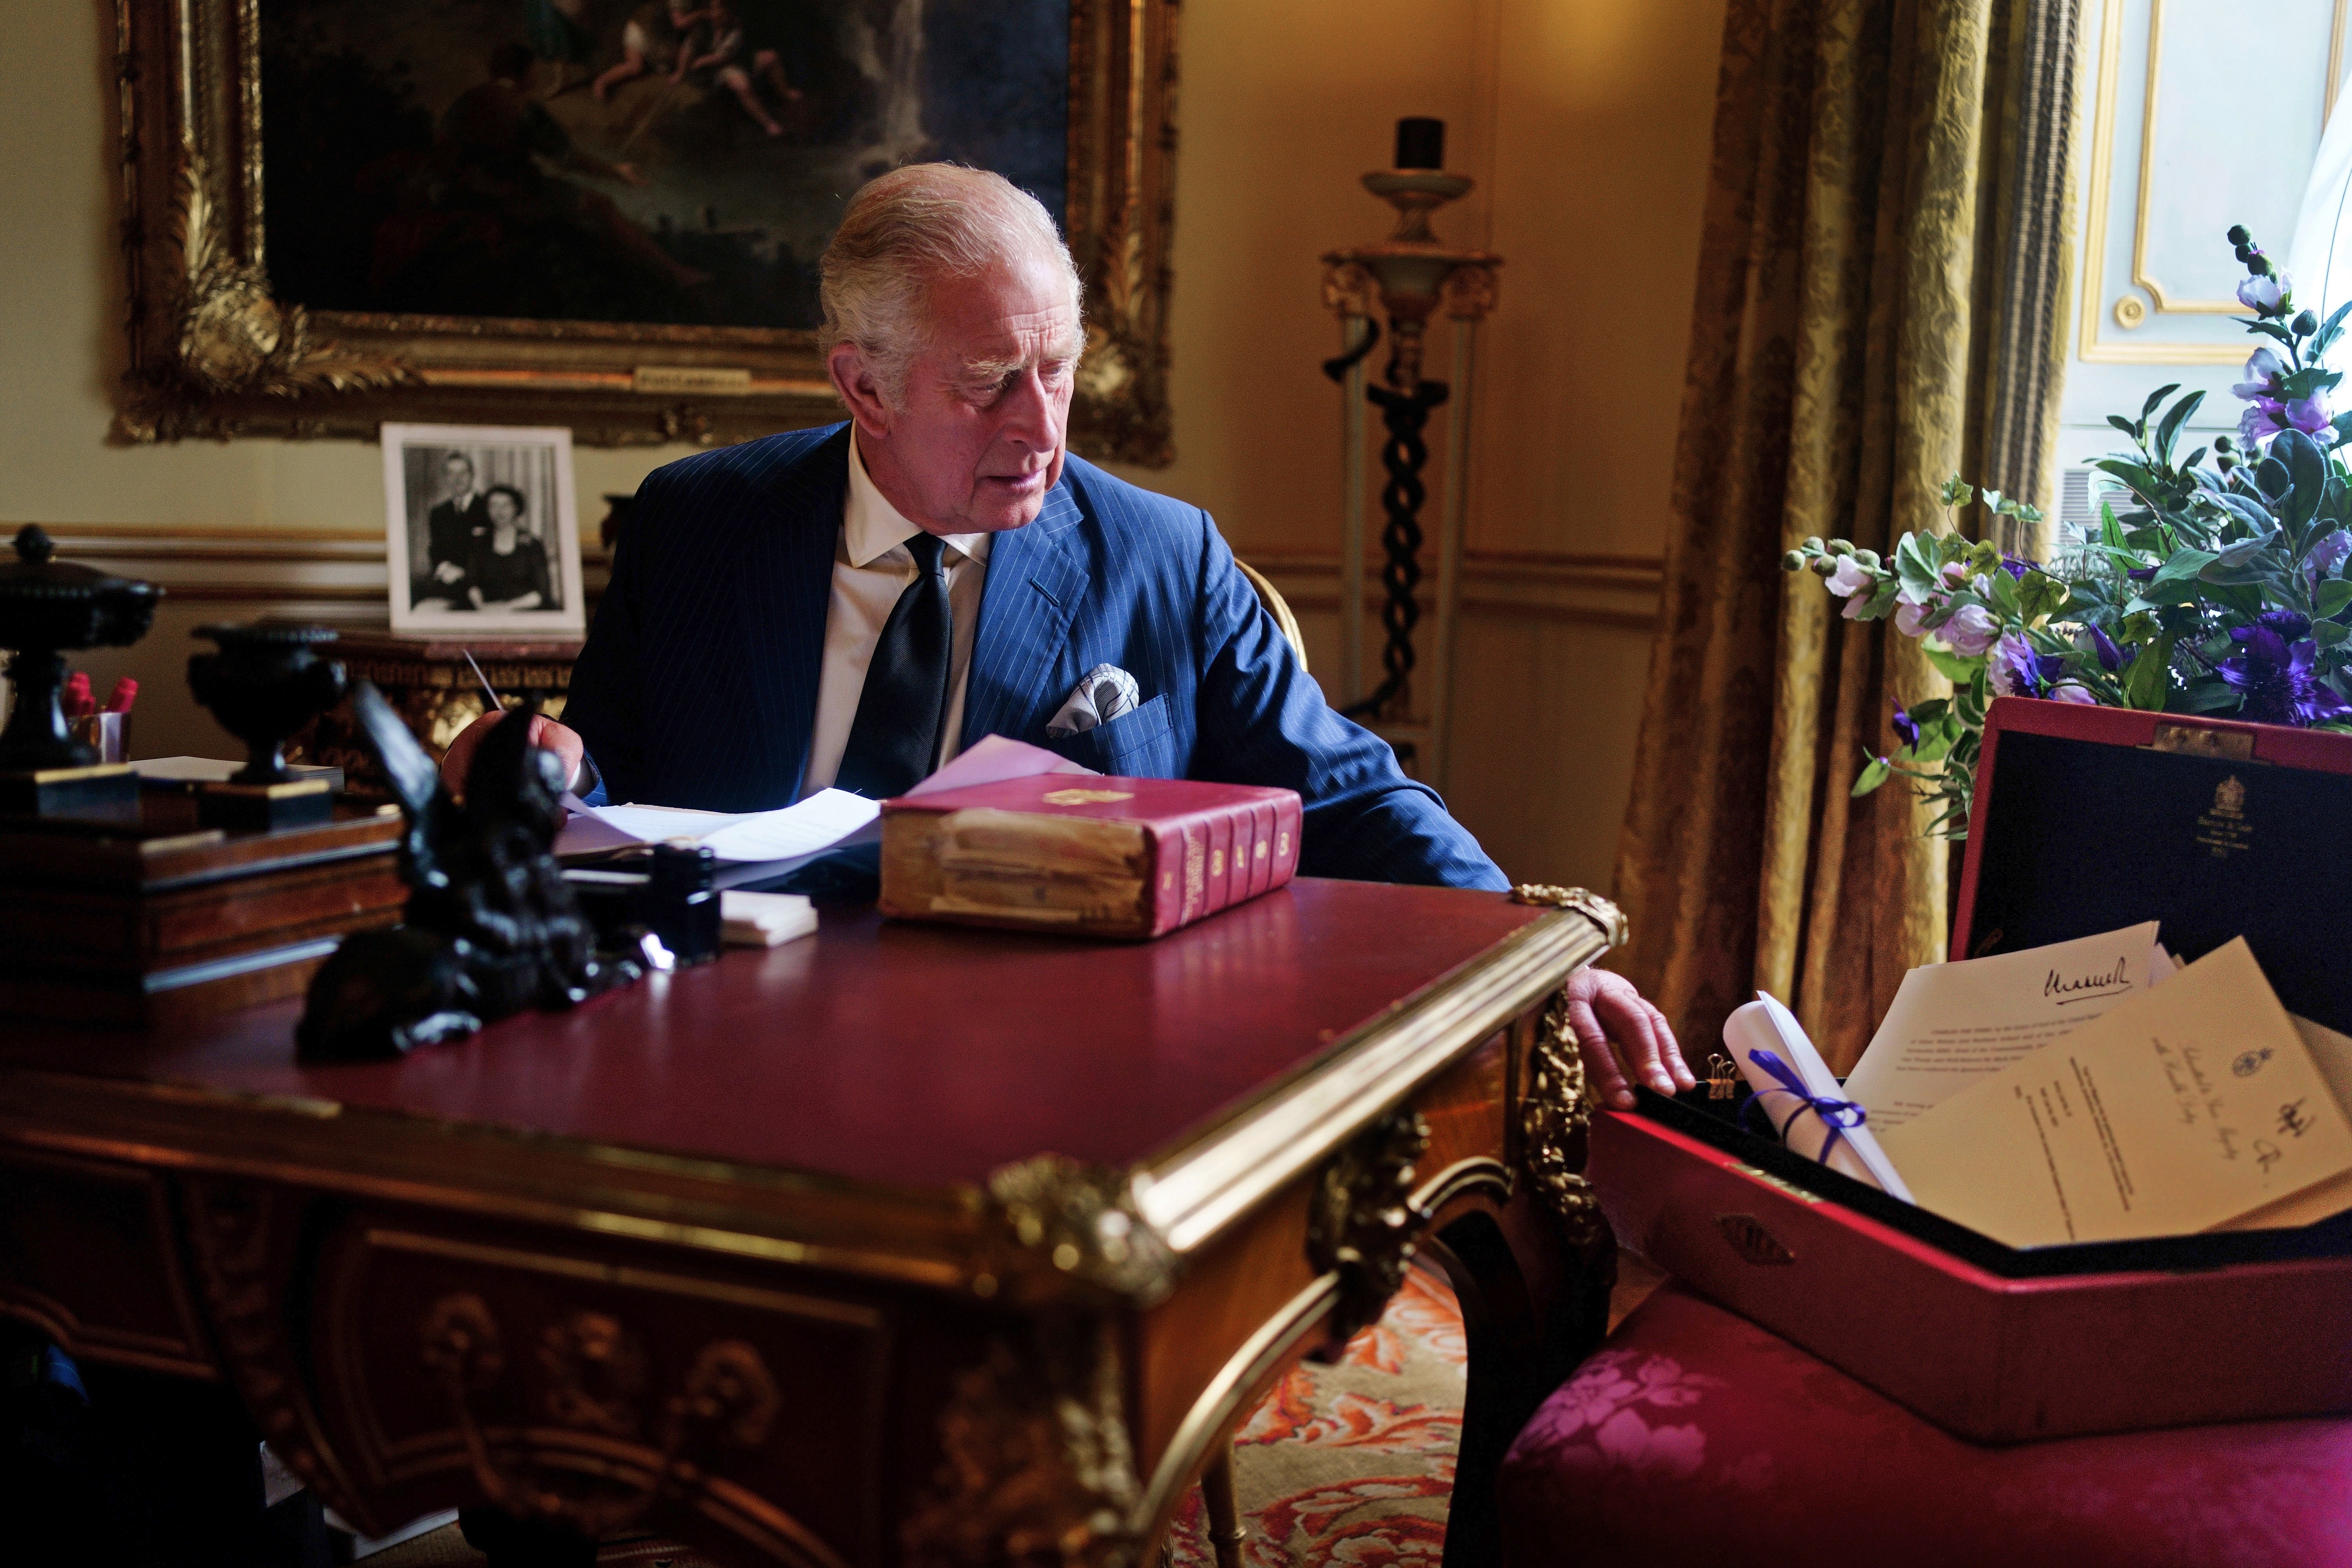 The image shows the King carrying out official government duties at Buckingham Palace